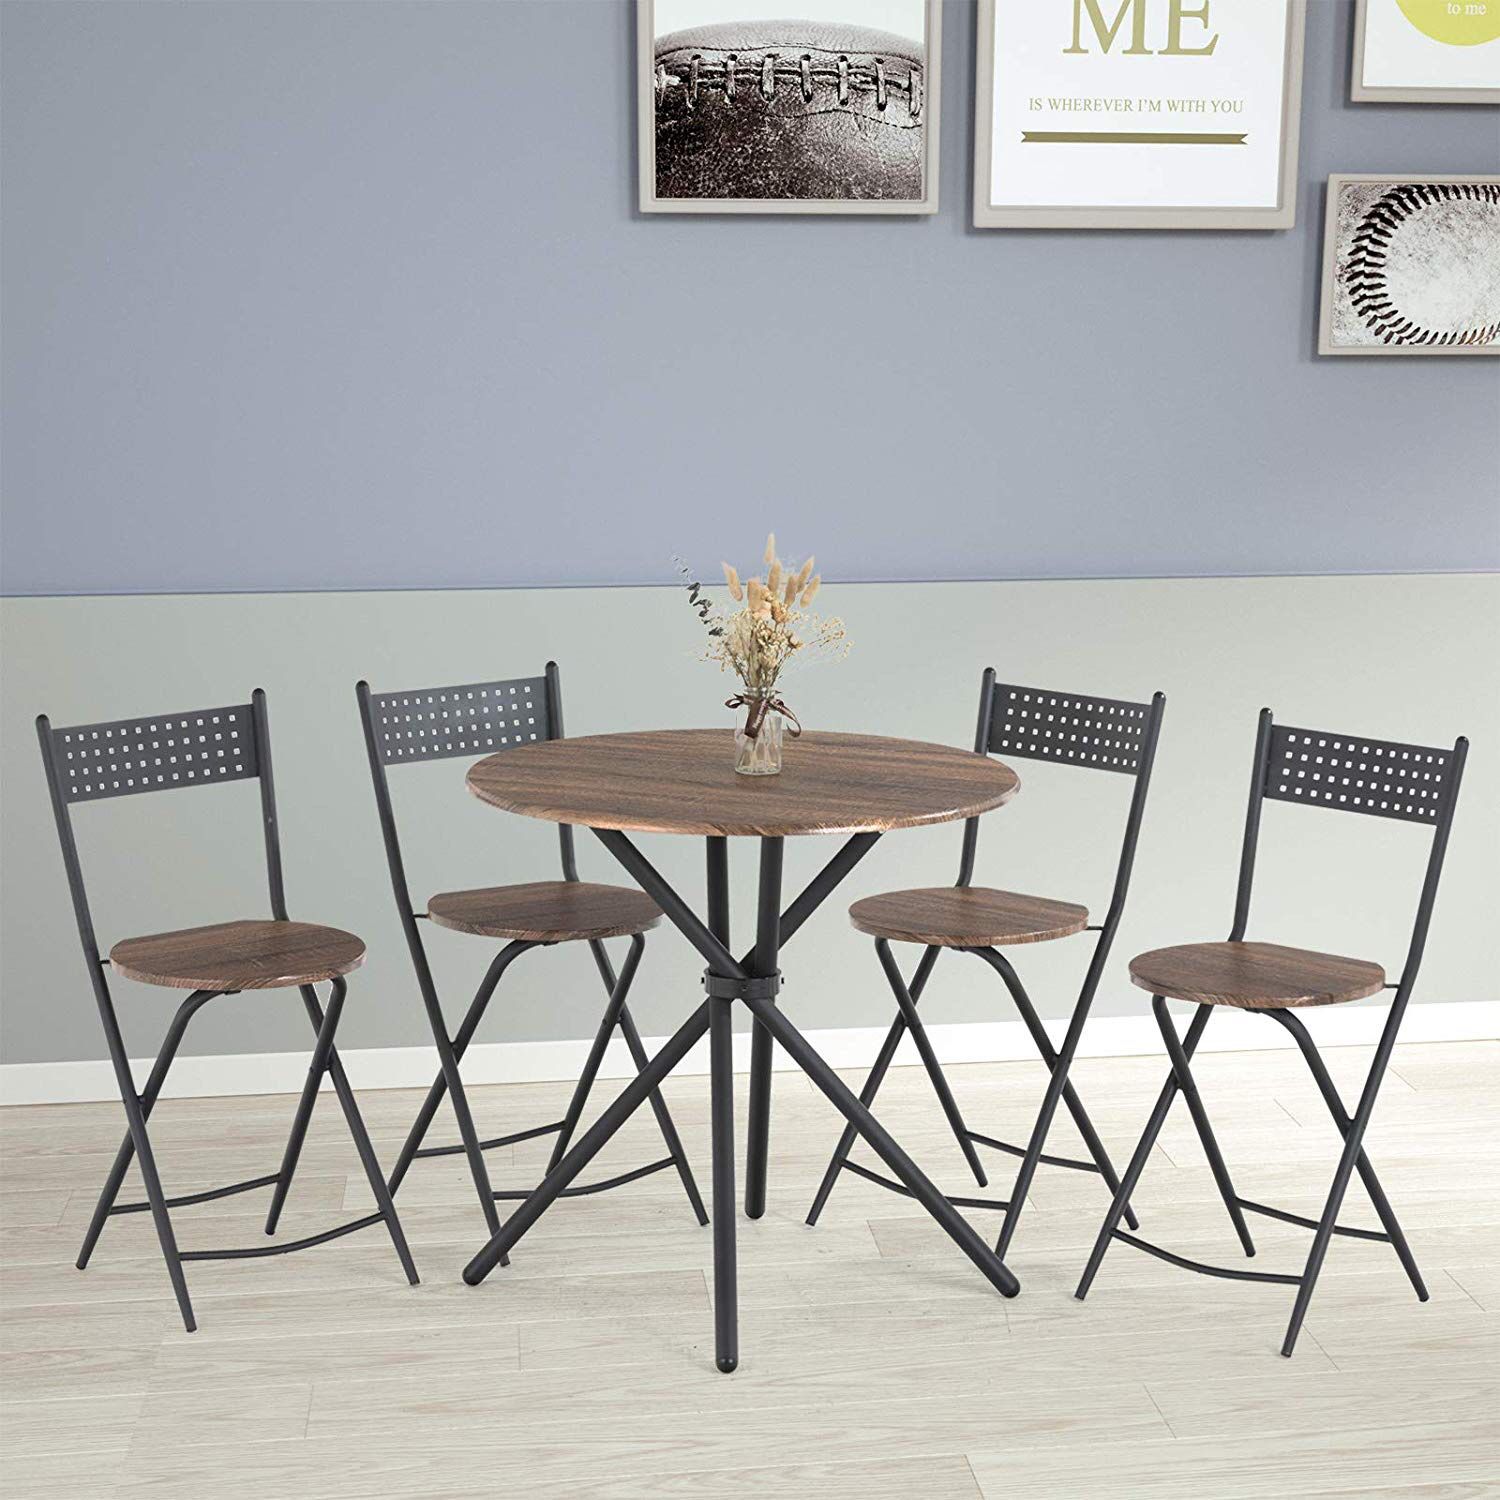 mecor 5 Pcs Dining Table Set 4 Folding Chairs, Mid-Century Vintage Round Coffee Table and Foldable Chairs with Wood Top and Metal Frame for Kitchen P